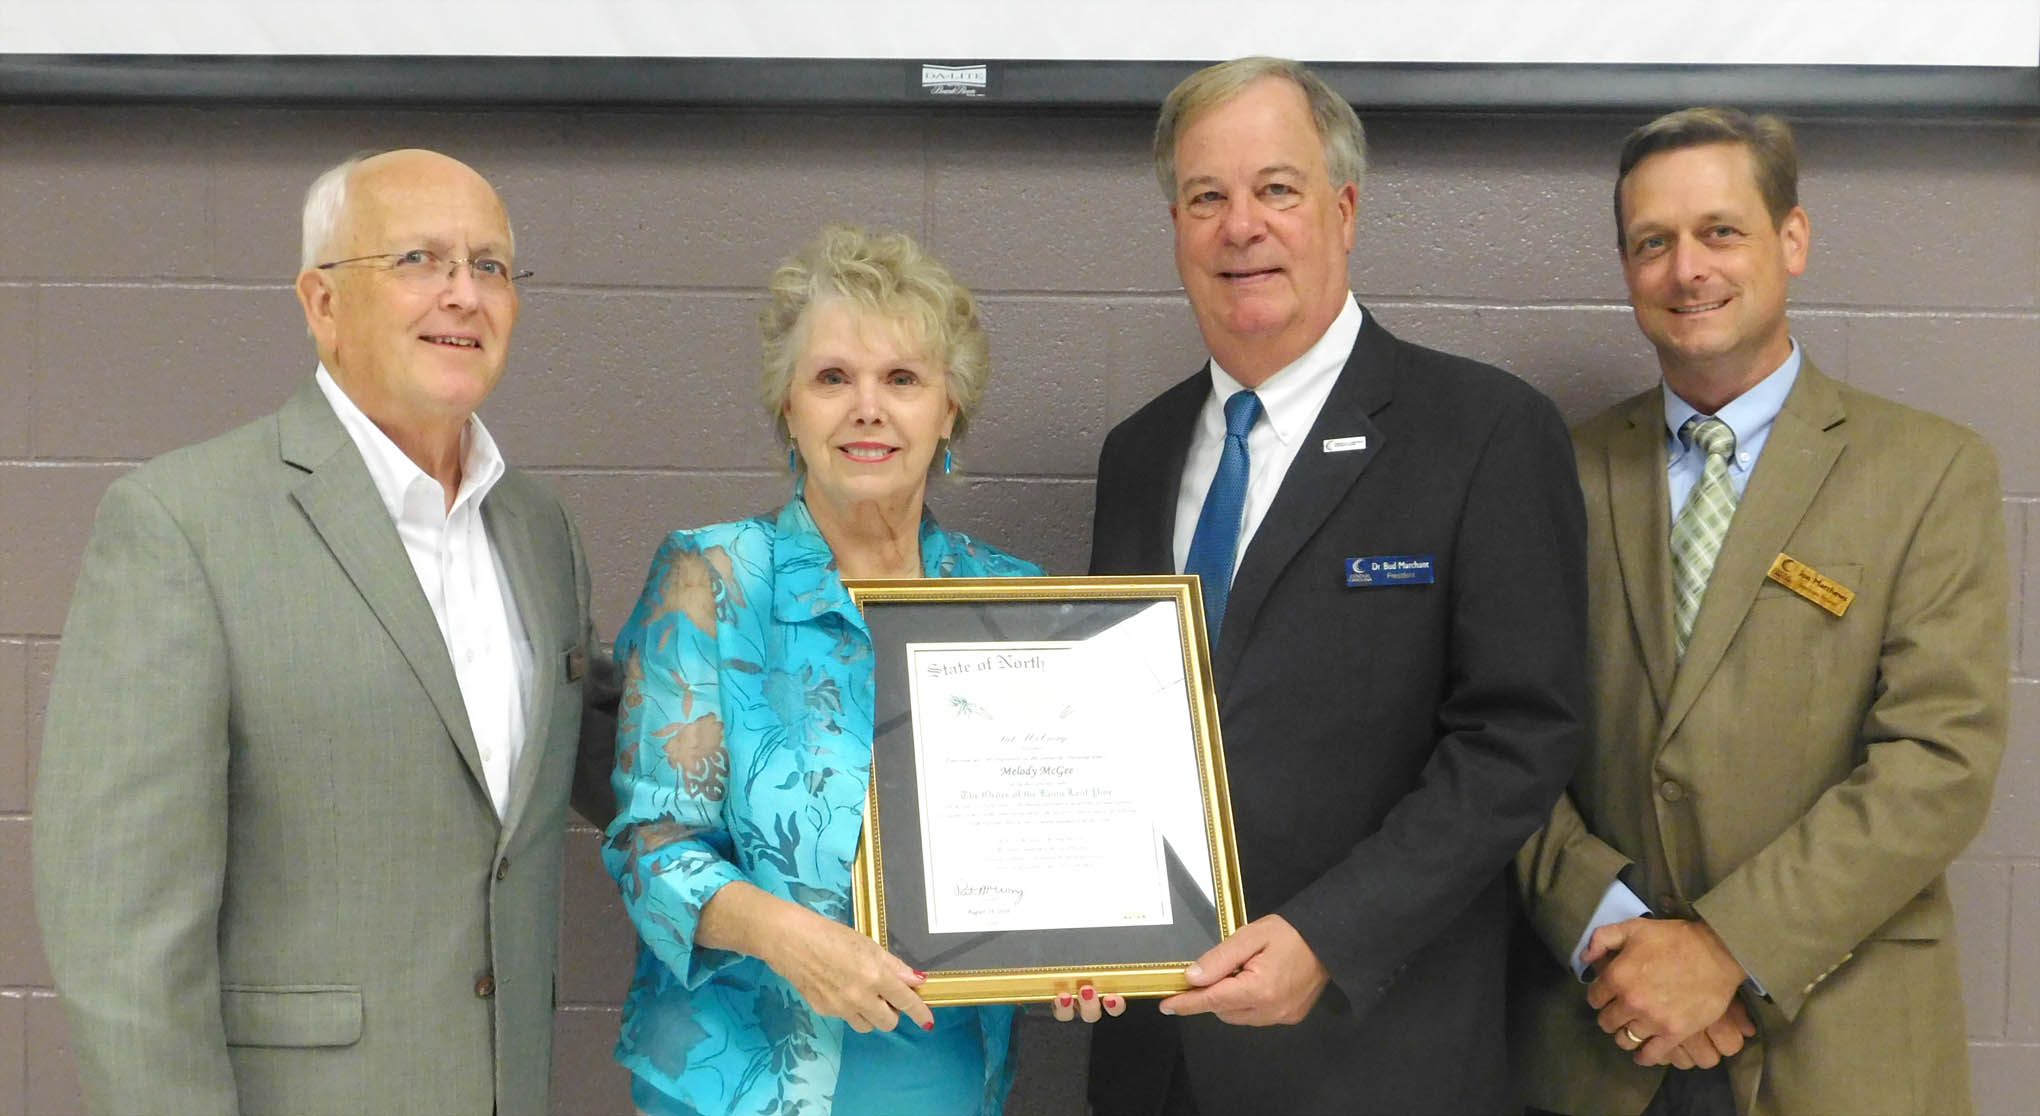 Read the full story, Retirement reception honors CCCC's Melody McGee